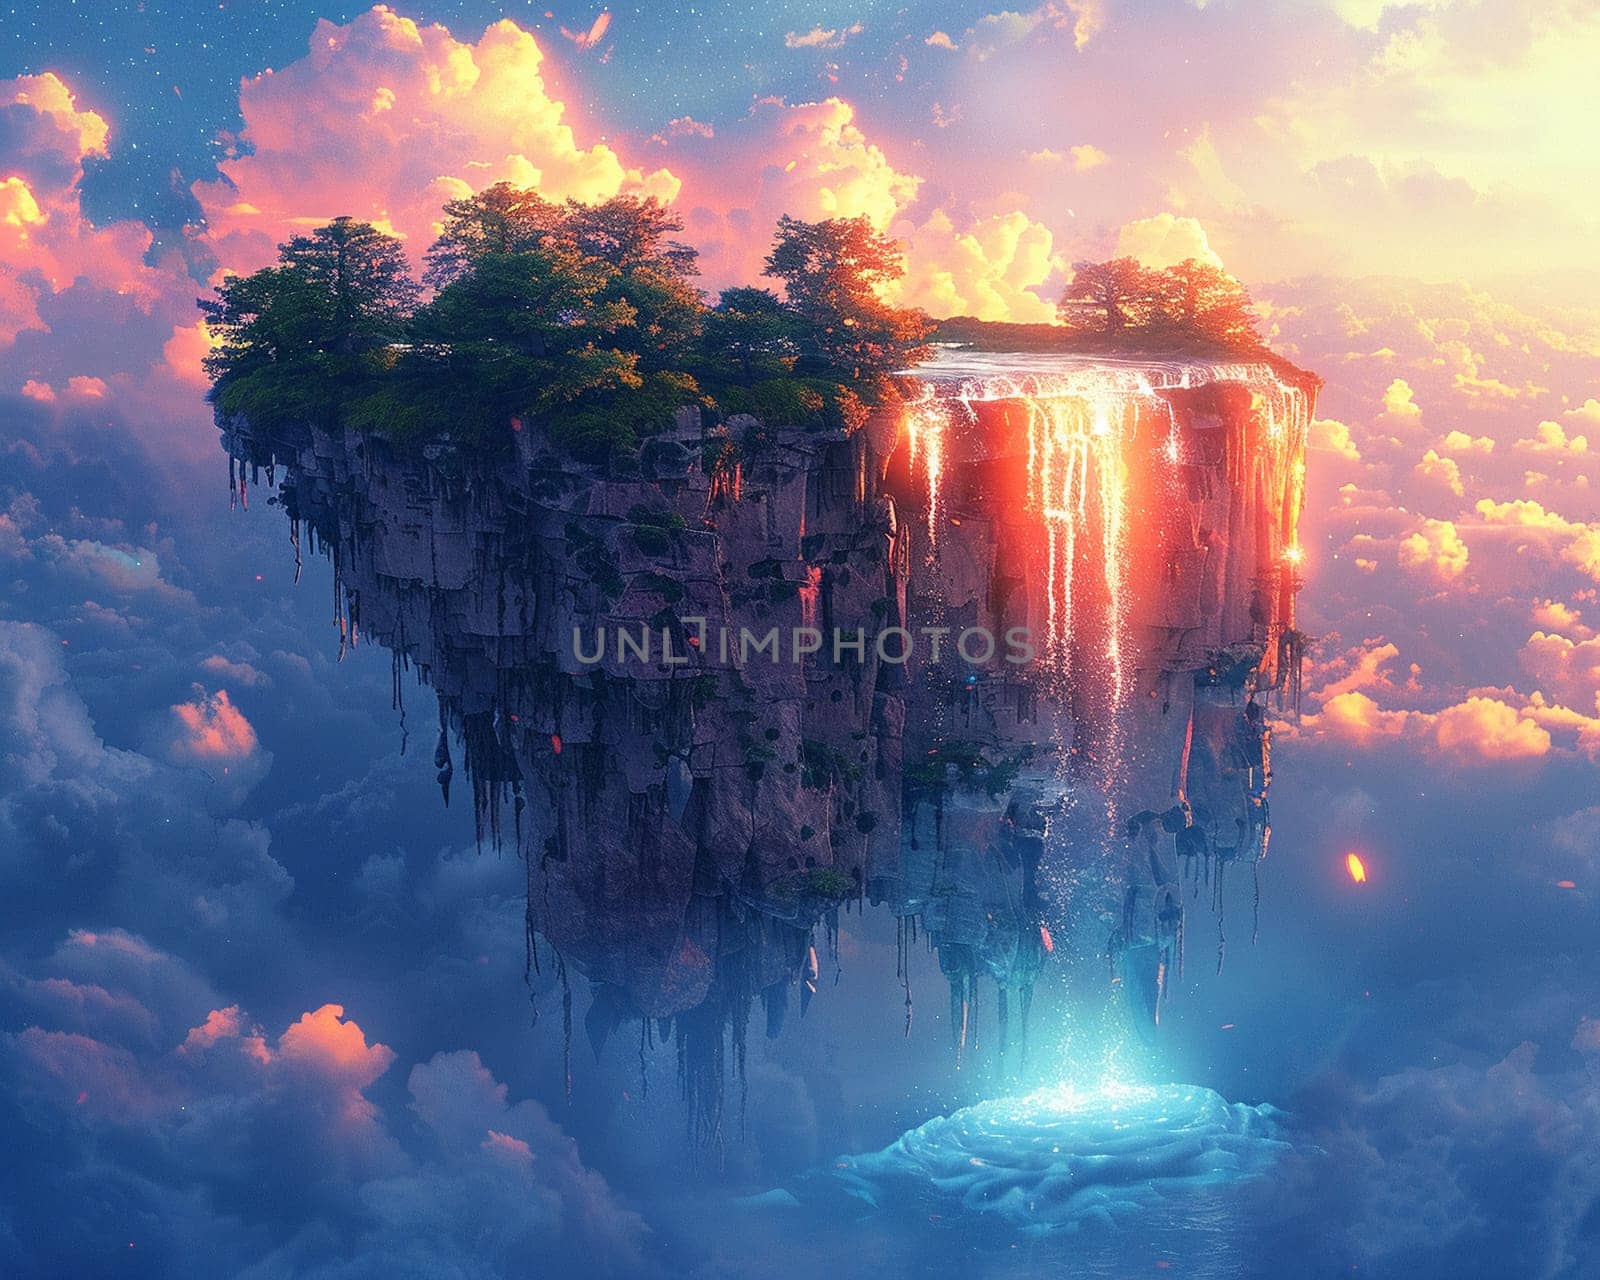 Surreal floating island with a cascading waterfall, illustrated in a dreamy and imaginative style.